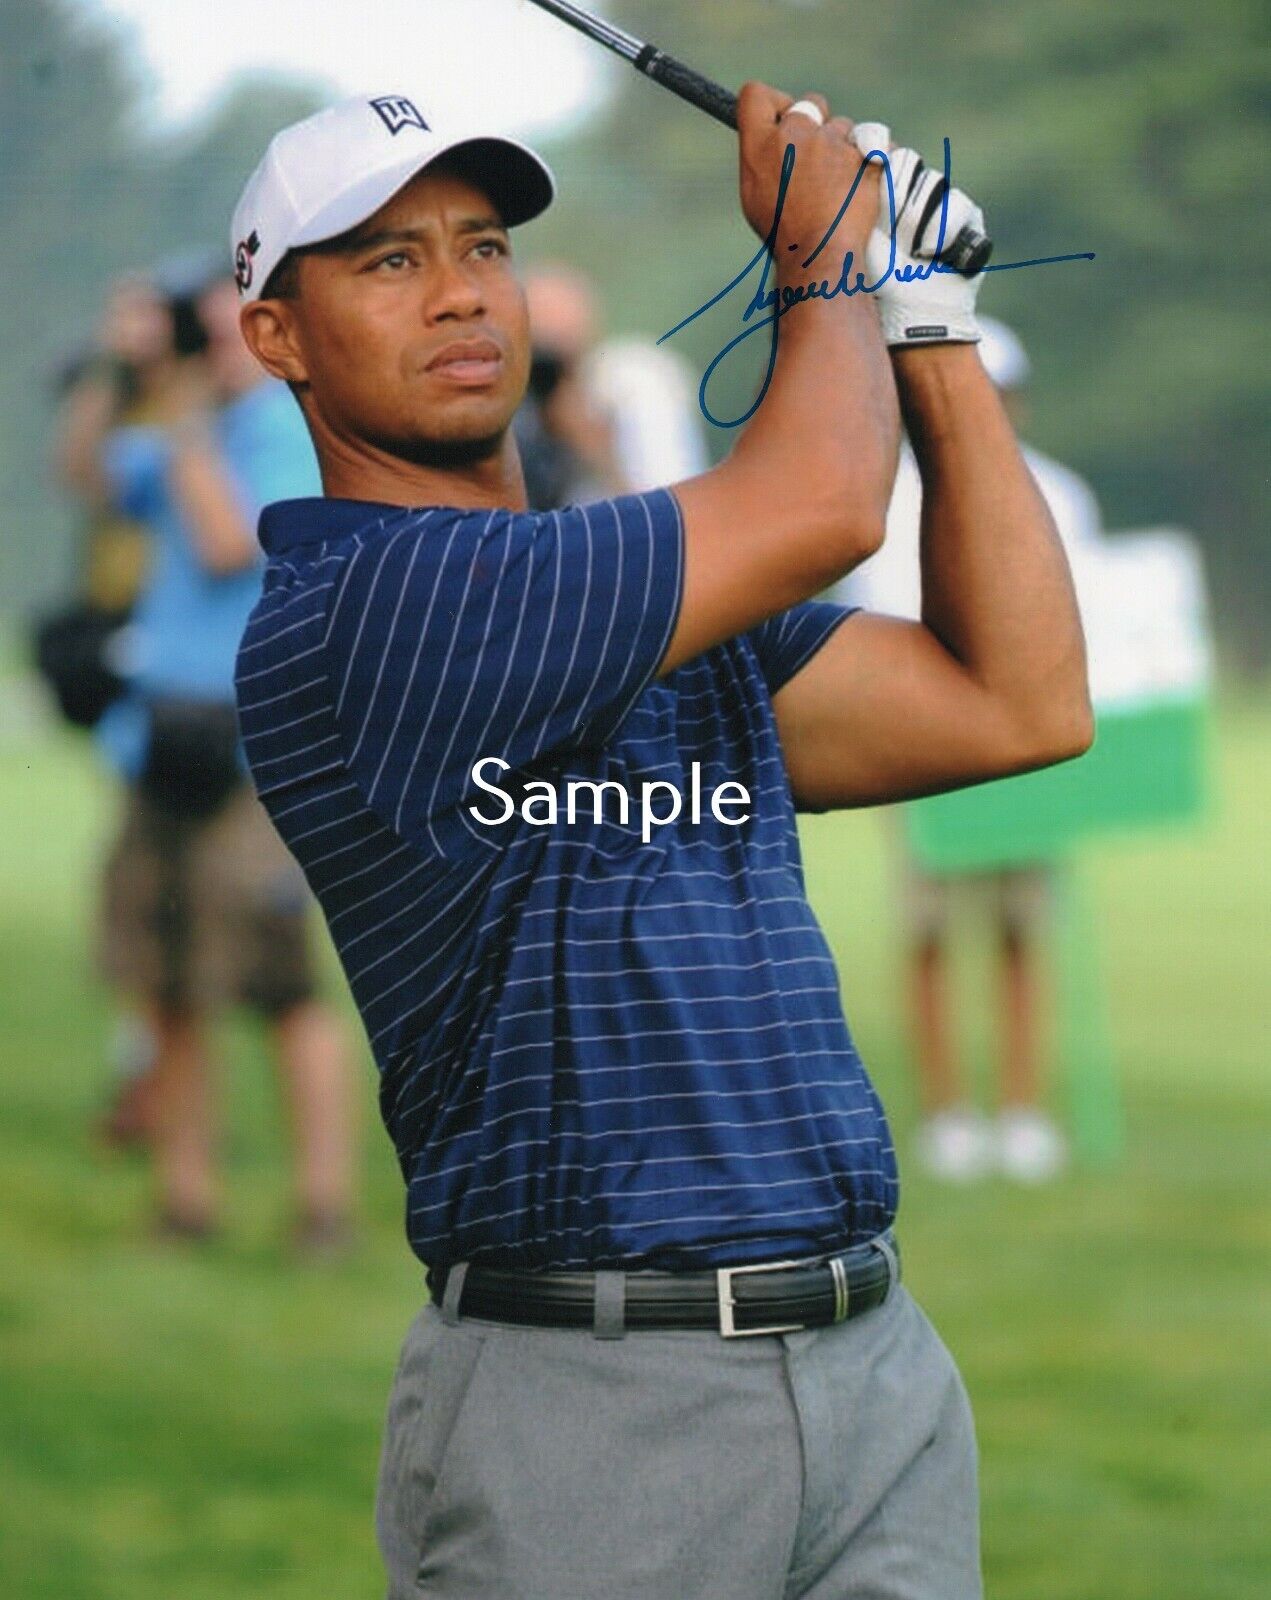 Tiger Woods Autographed Signed Golf Photo 8x10 (reprint)